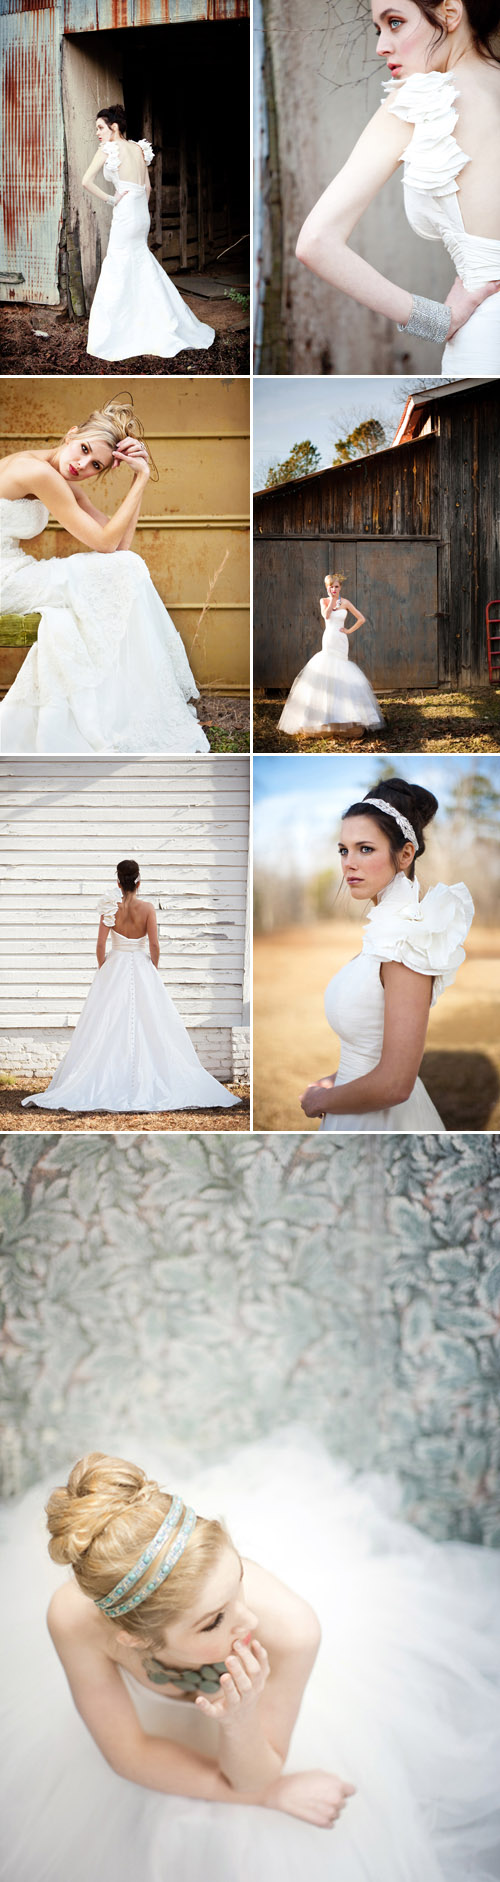 Heidi Elnora 2011 wedding dress collection photographed by Leslee Mitchell